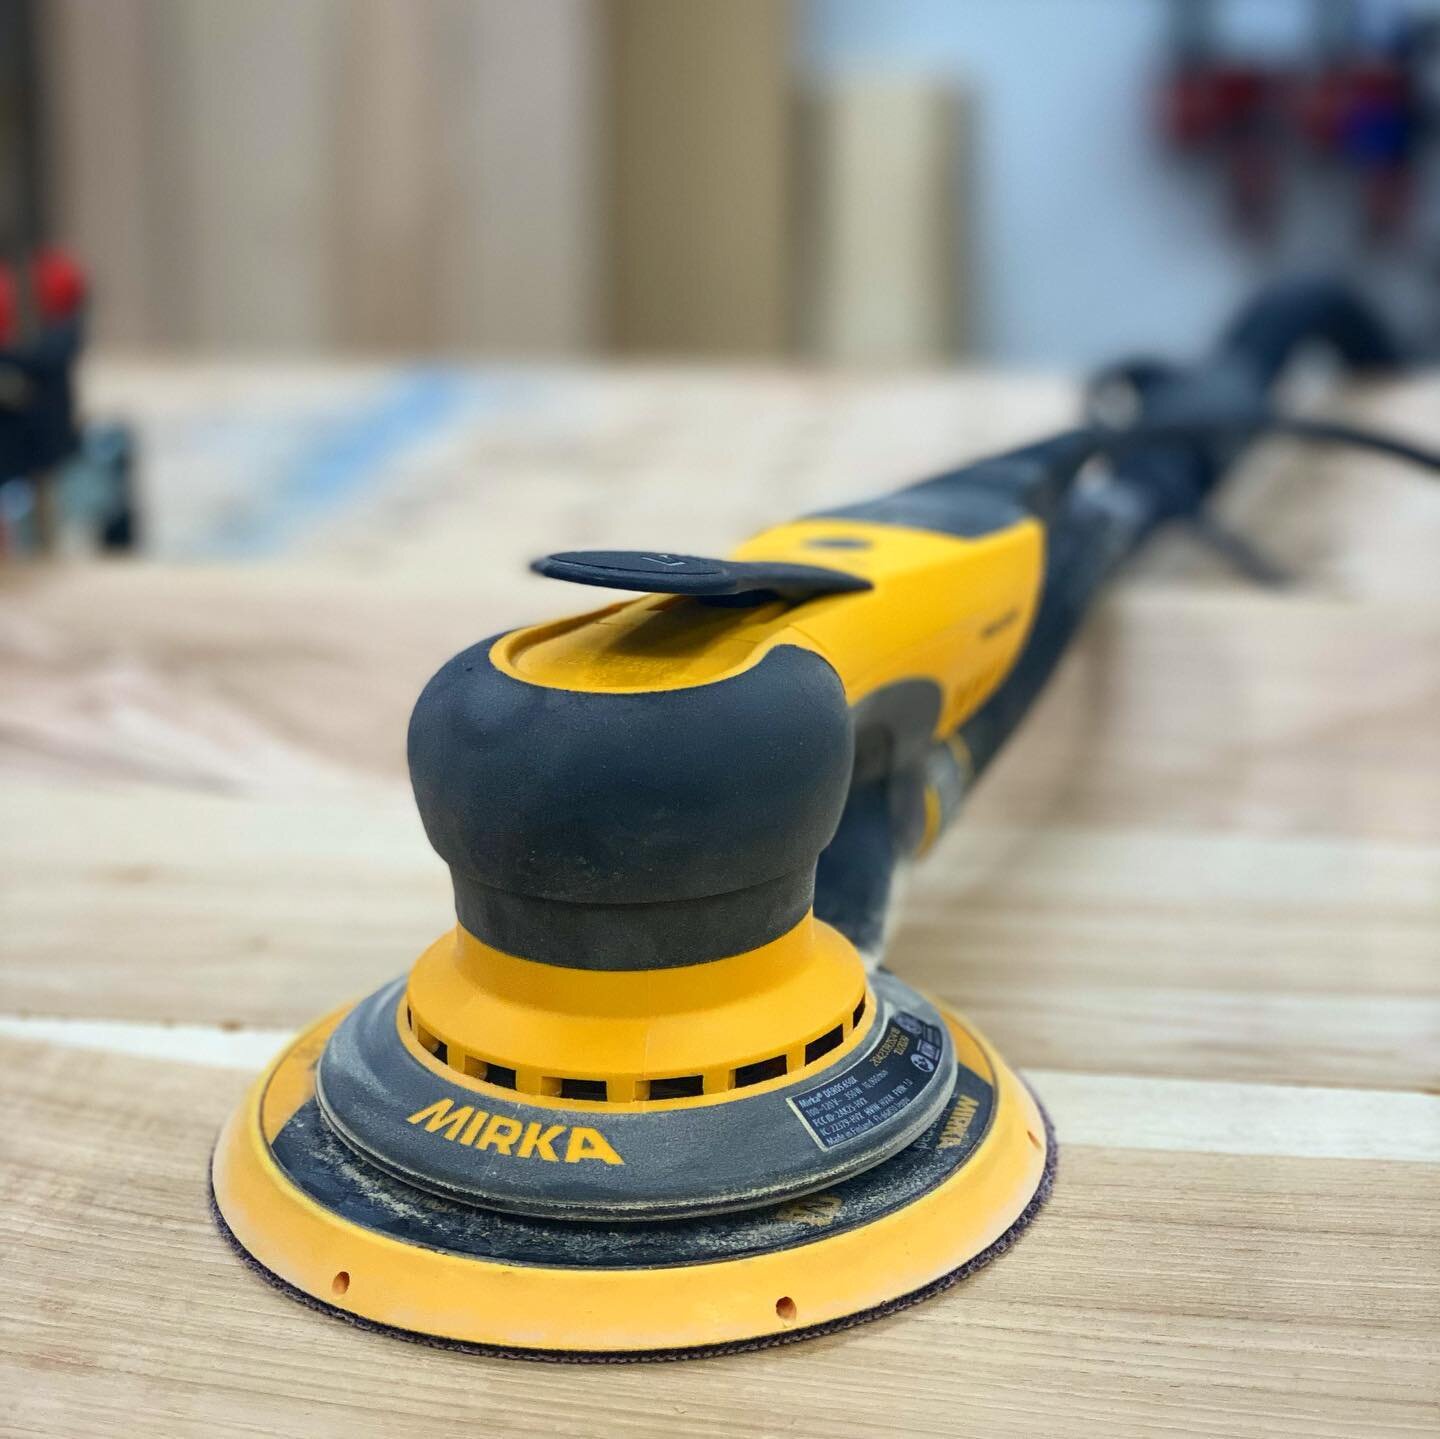 Been using the @mirka_usa Deros and Hepa Vac for the last month or so. It&rsquo;s a total game changer. With the Abranet paper, this sander and vac combo make little to no dust. It&rsquo;s incredible. #MullenTheMaker
&mdash;
#woodworkers #woodworking